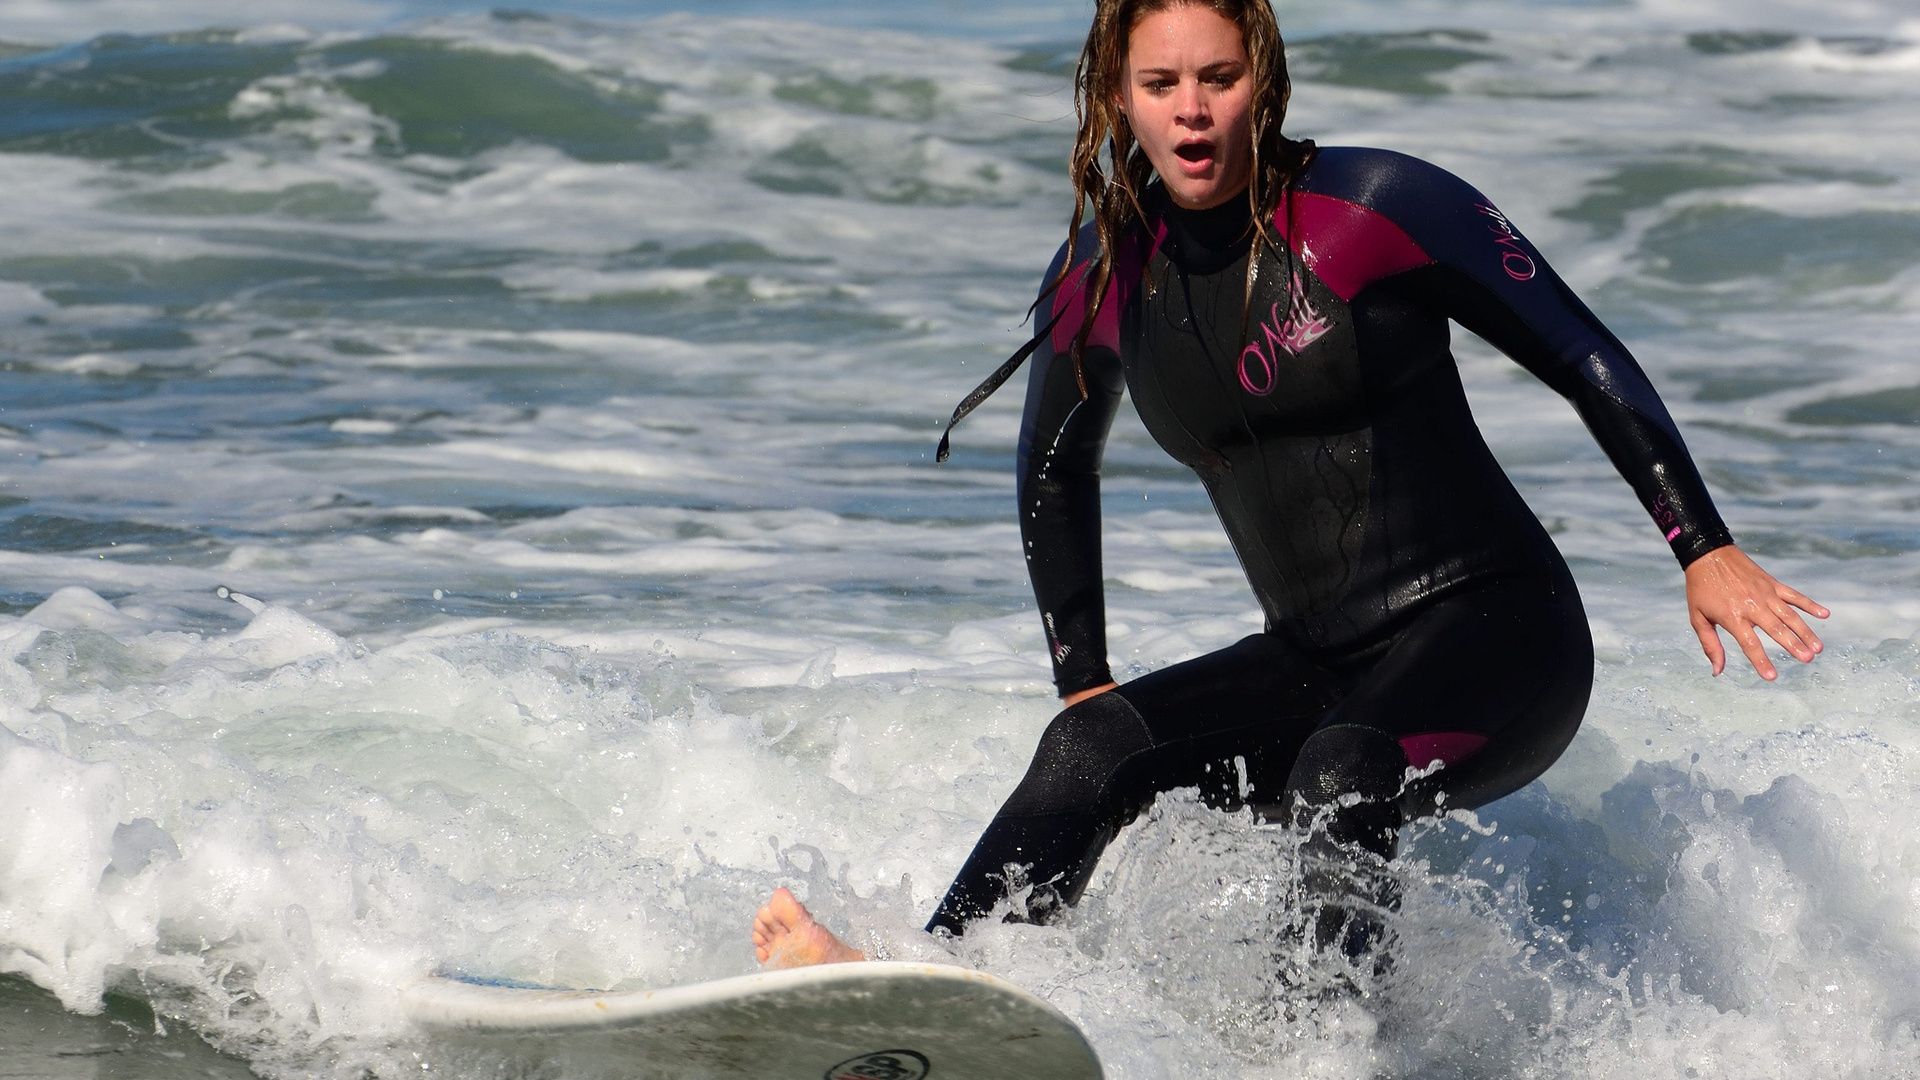 Surfer Girl hd picture